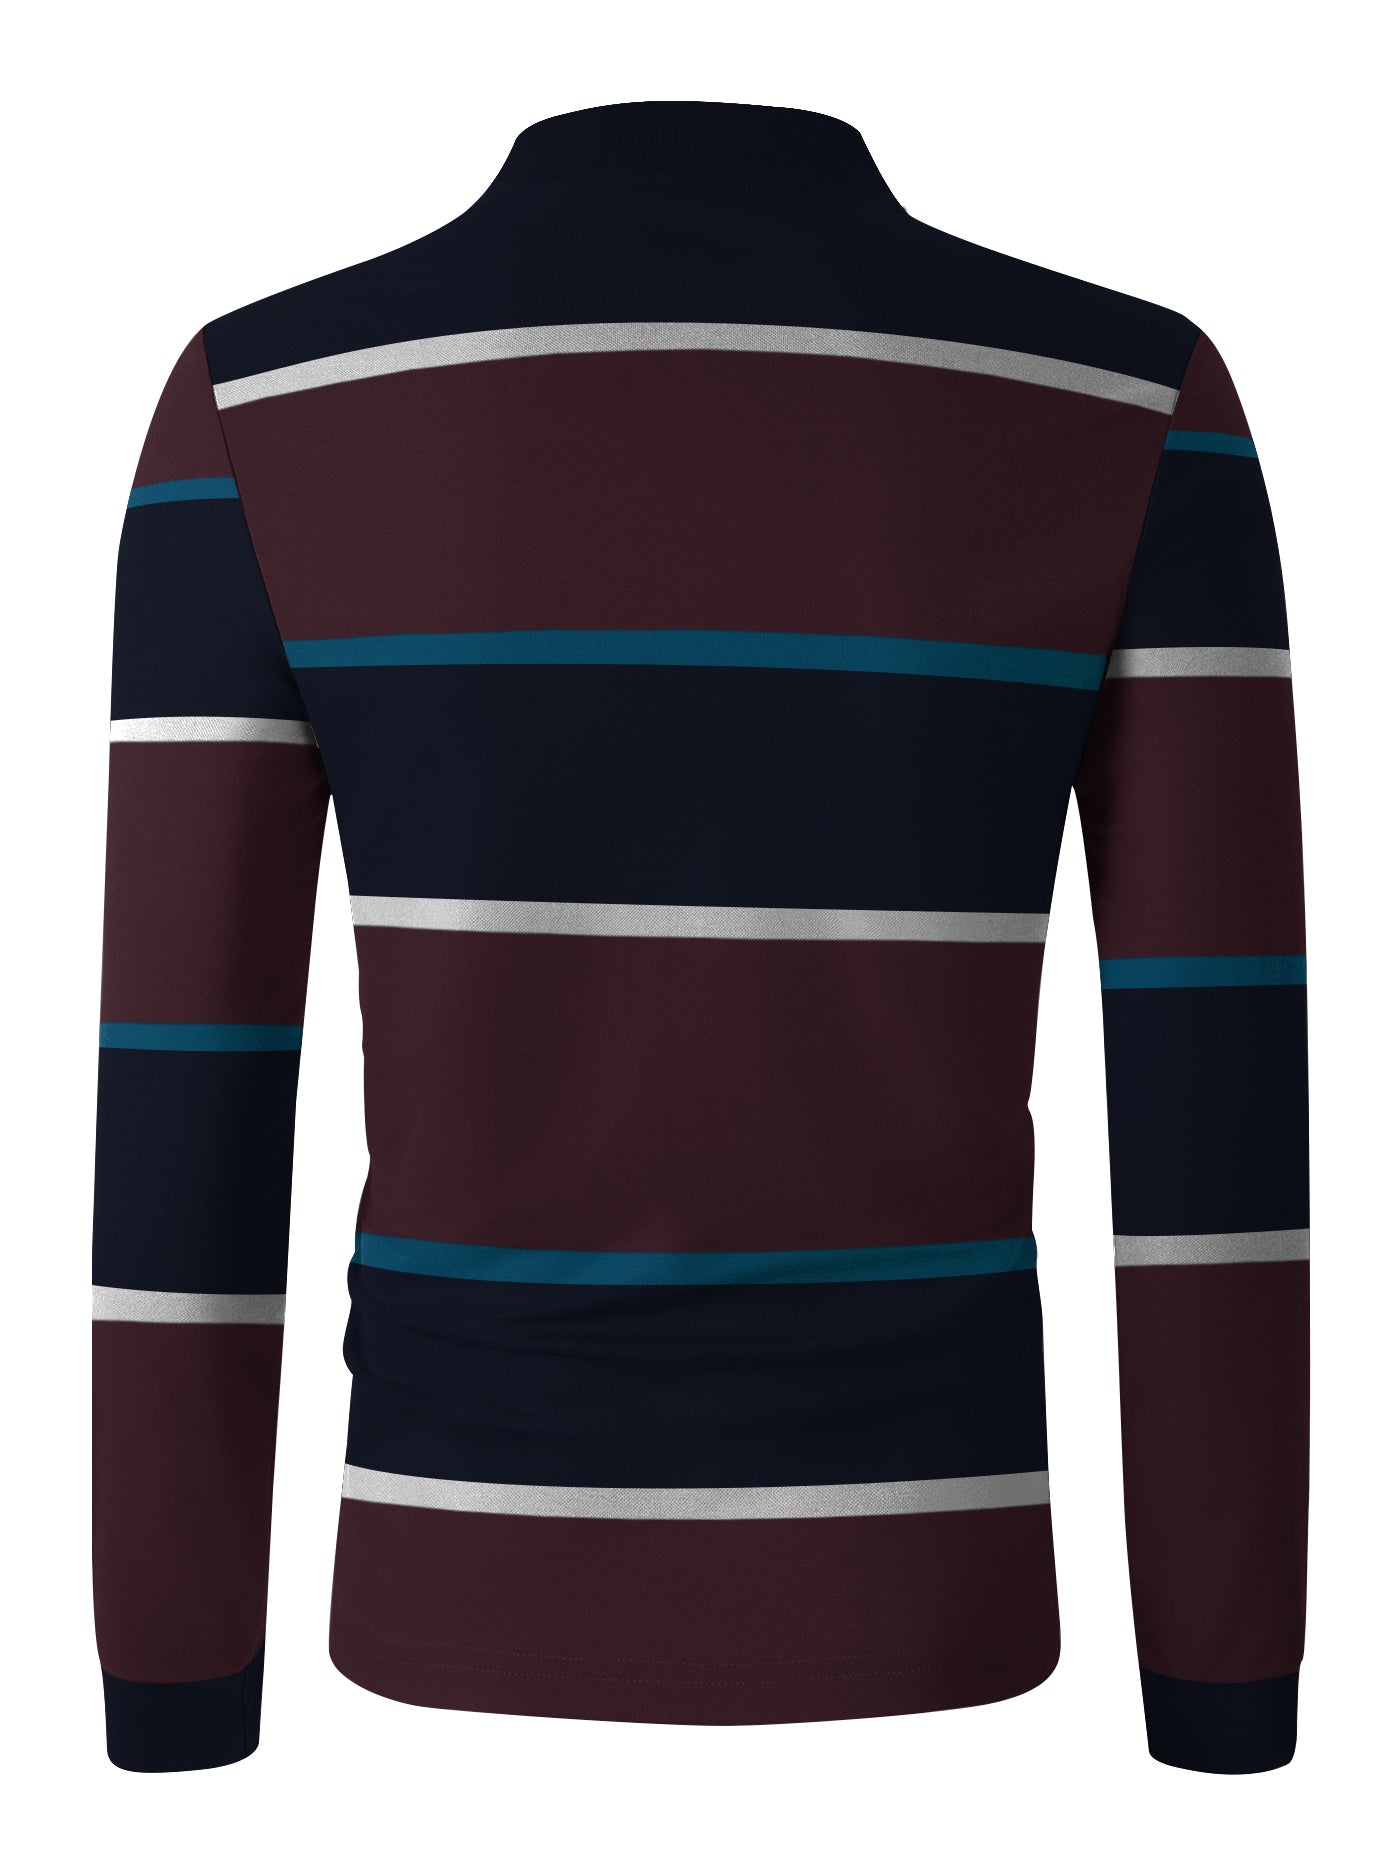 Louis Vicaci Long Sleeve Polo Shirt For Men-Sky with Navy Stripe